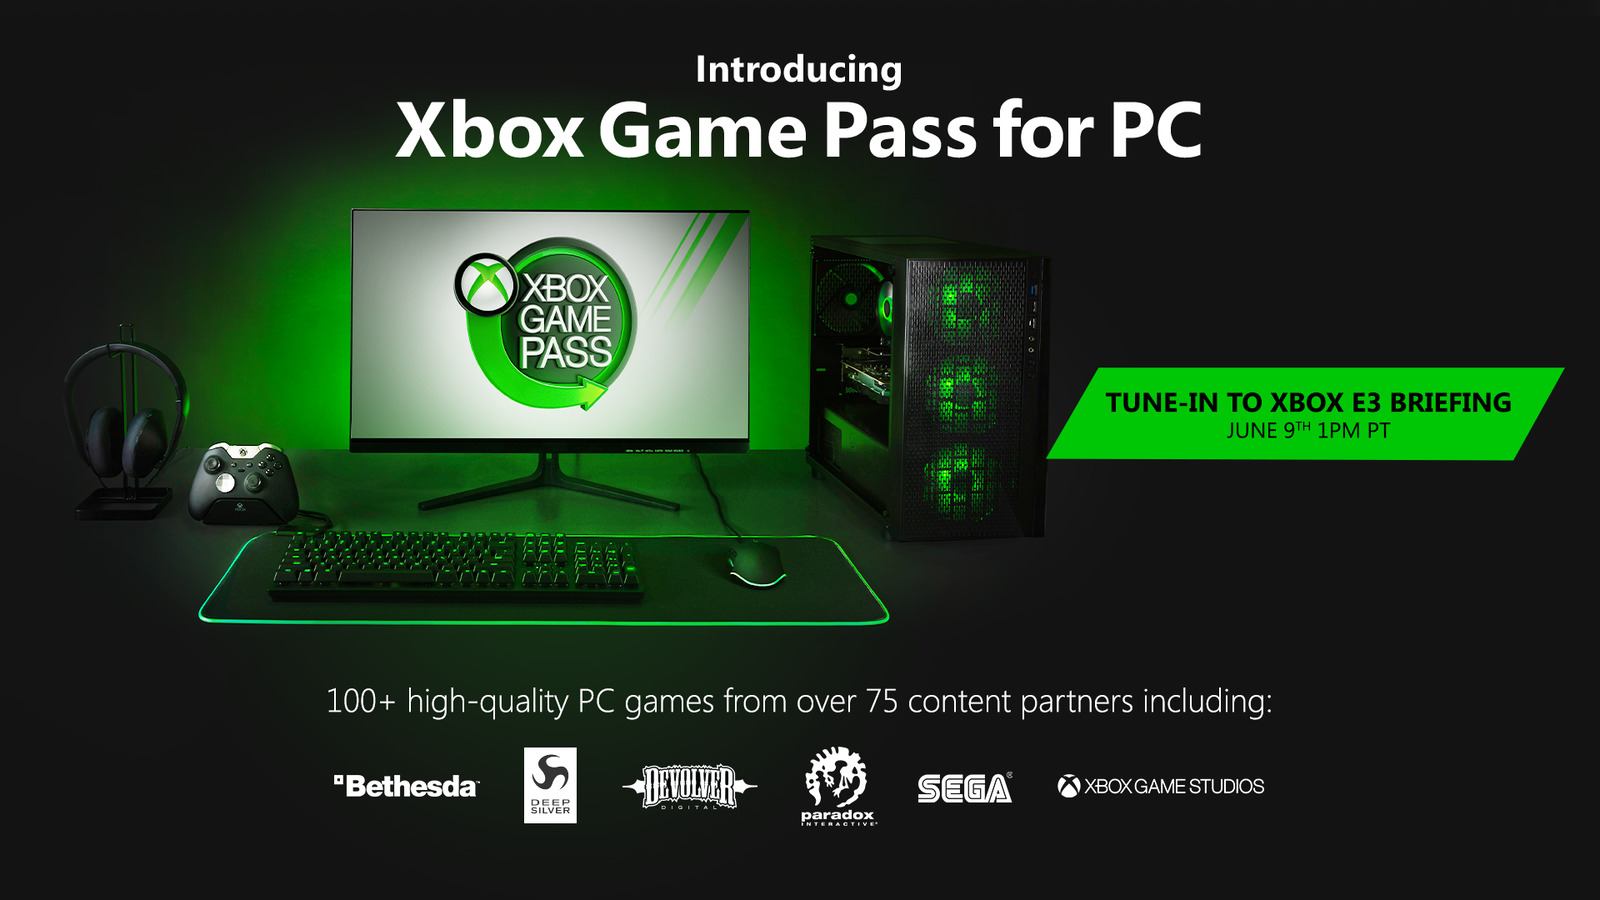 162641-Xbox_Game_Pass_for_PC.jpg